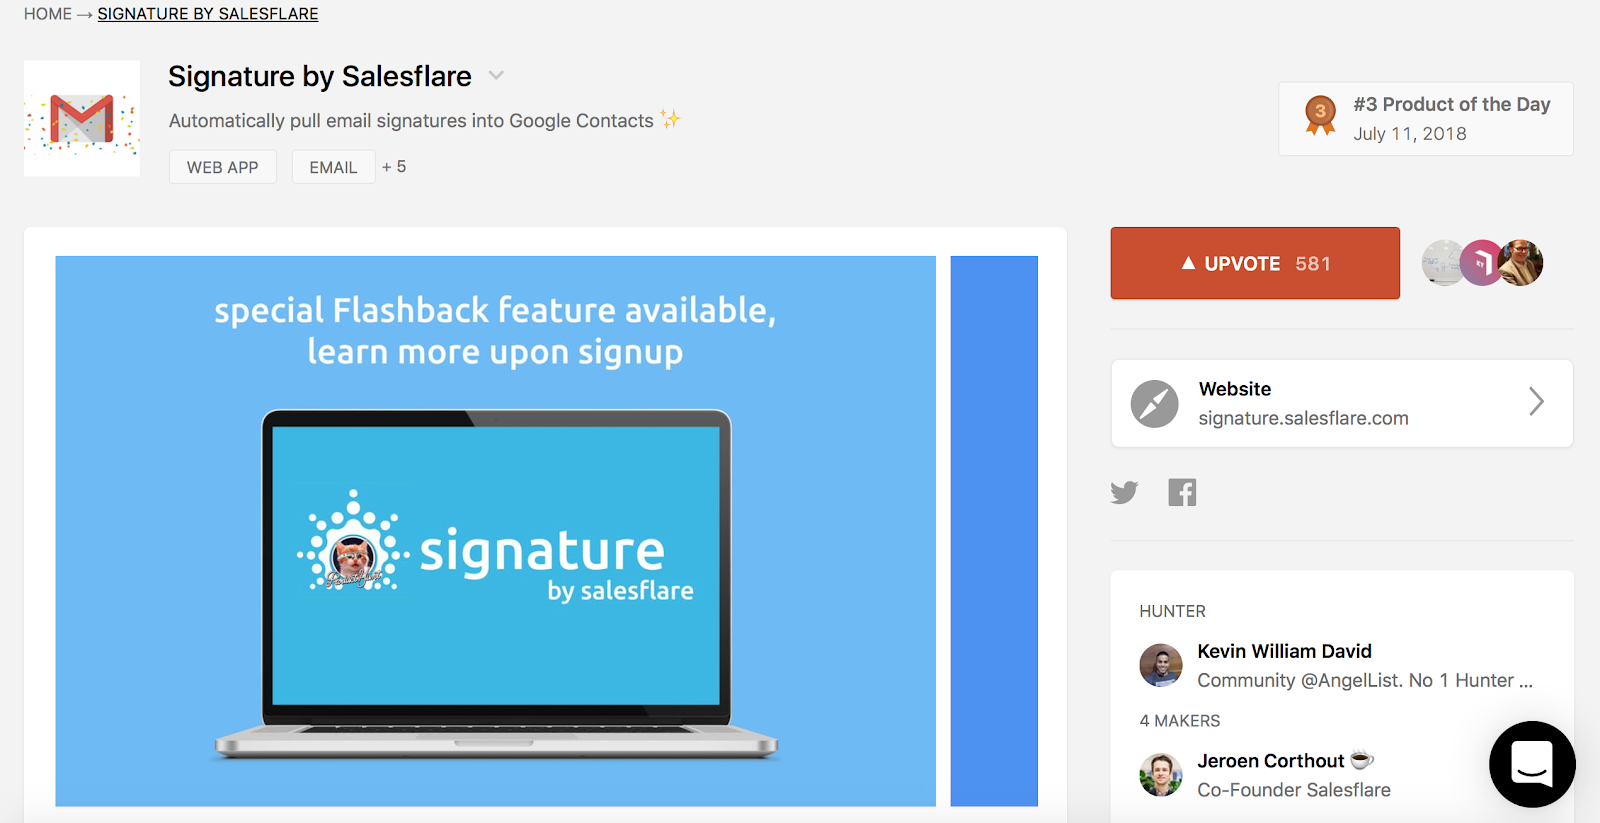 EXAMPLE #1: SIGNATURE BY SALESFLARE